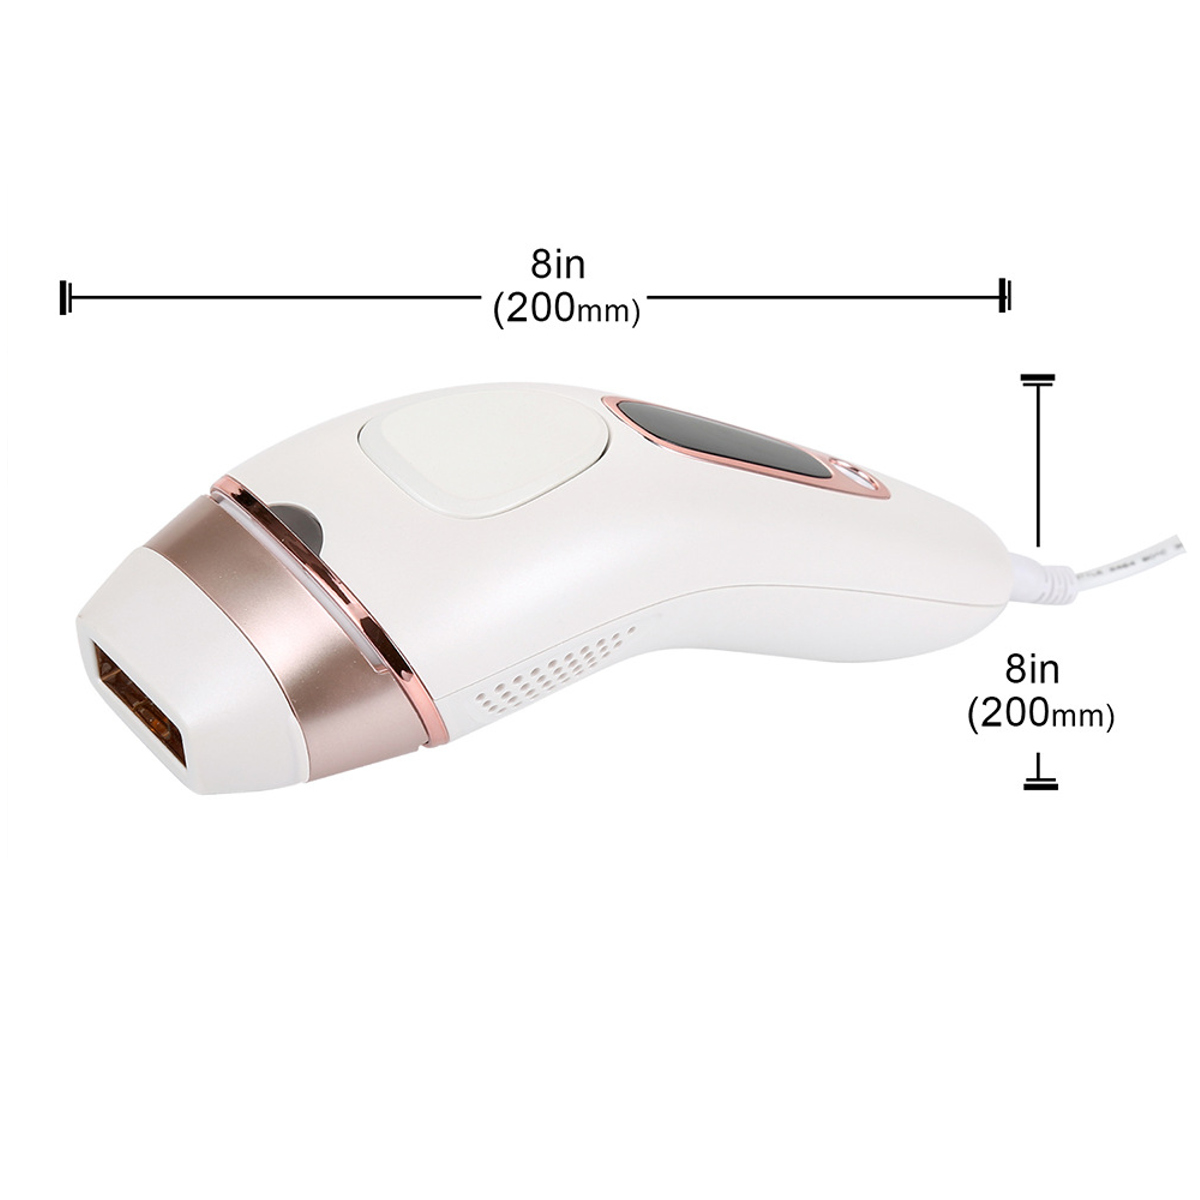 300000-Flashes-IPL-Light-Permanent-Hair-Removal-Device-LCD-Display-Home-Use-for-Women-and-Men-1416343